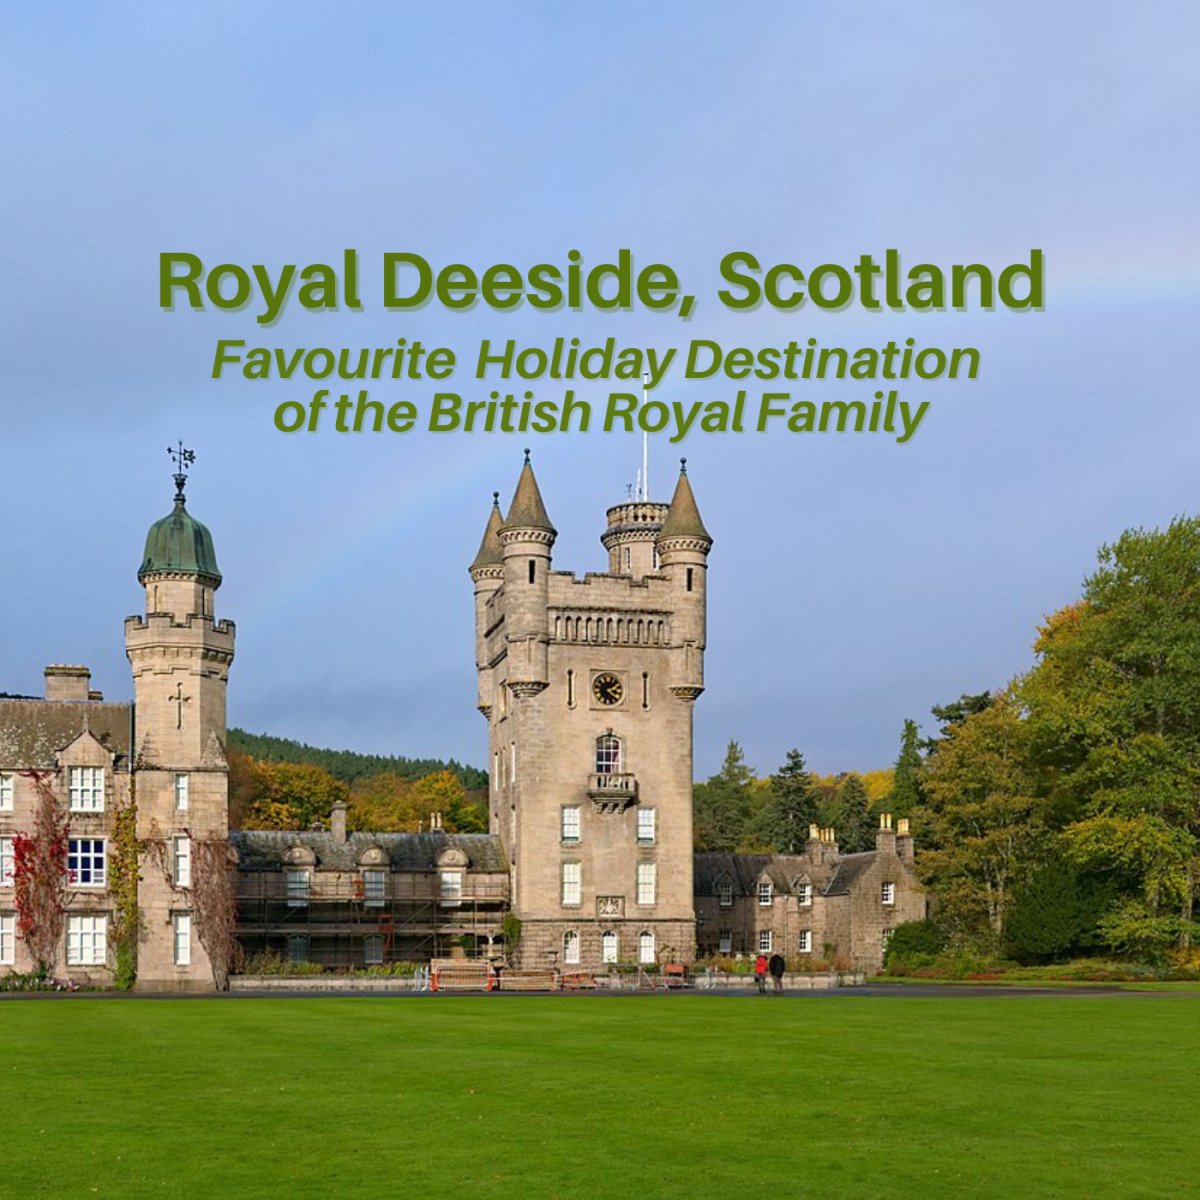 Visiting Royal Deeside and Balmoral Castle, the British Royal Family's Holiday Home, in Scotland